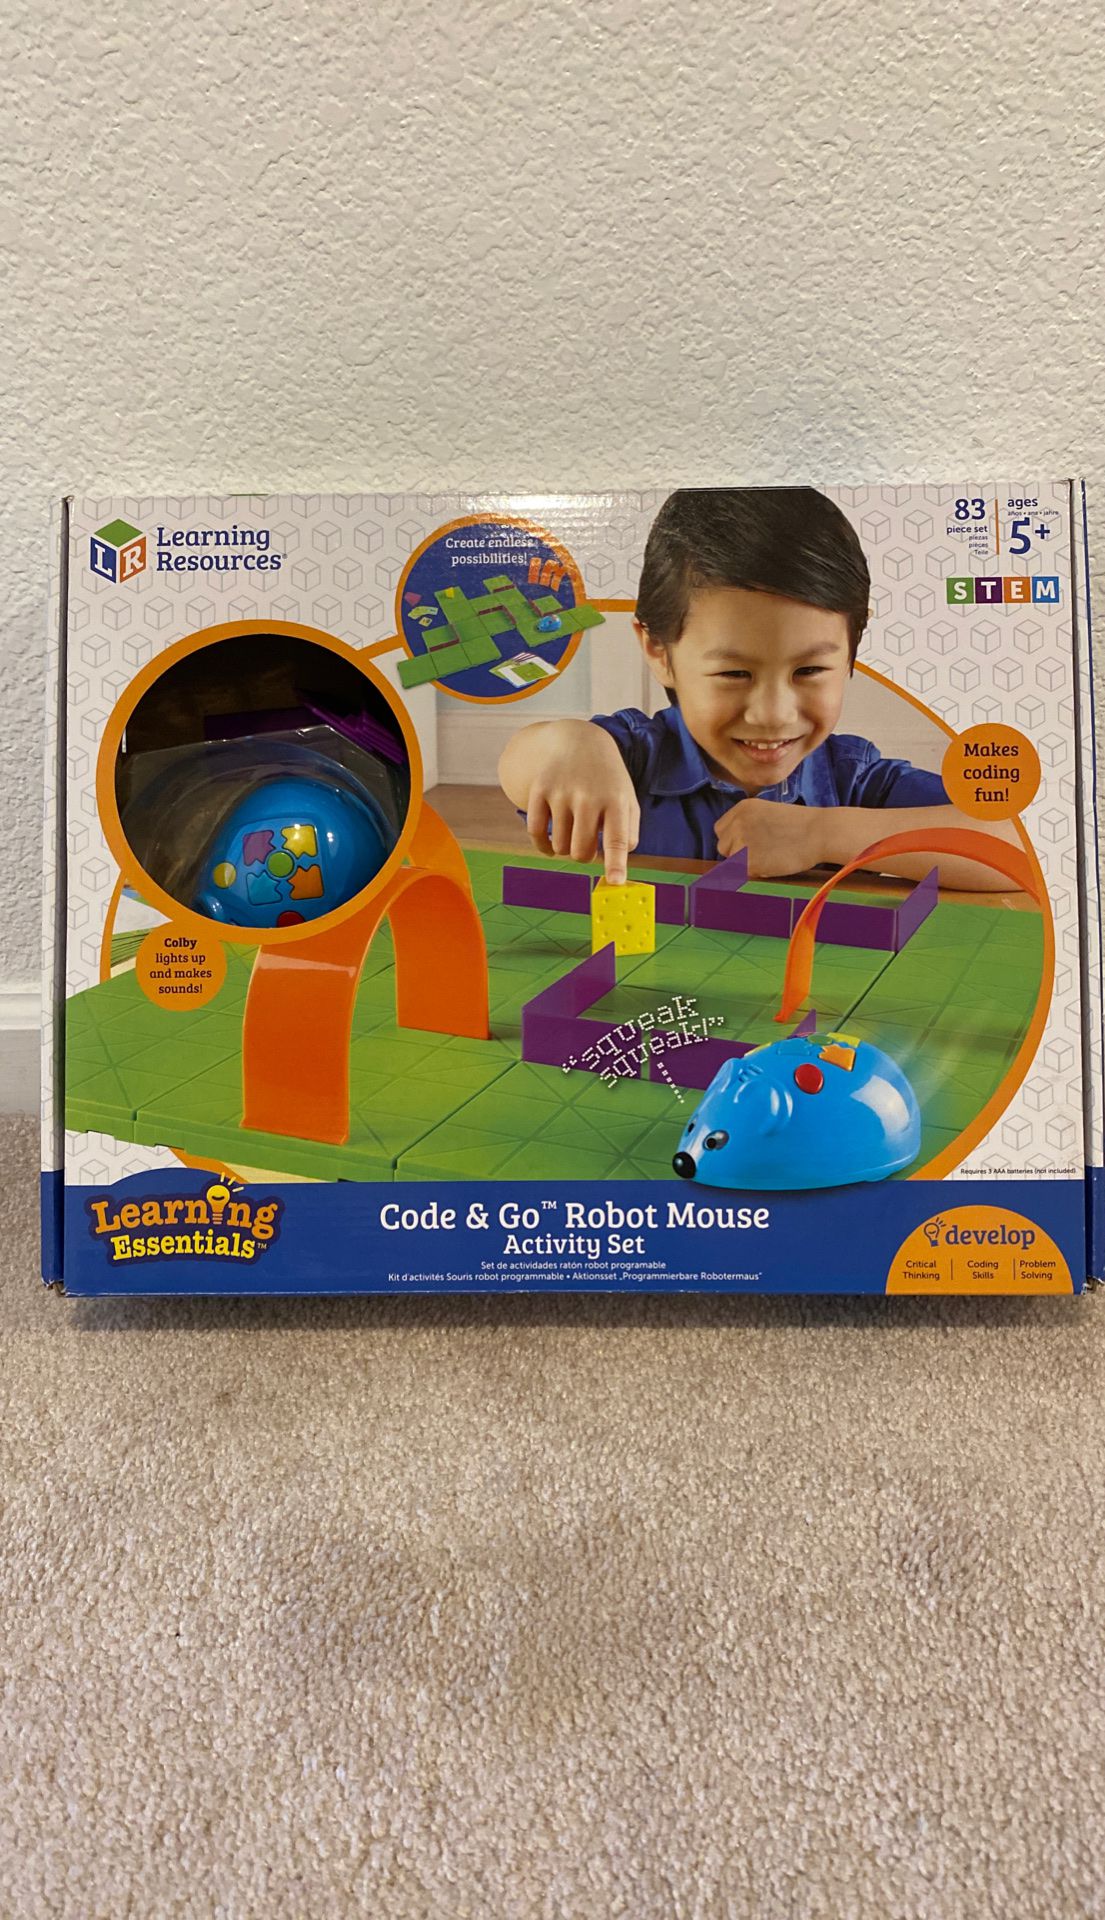 STEM Coding learning game